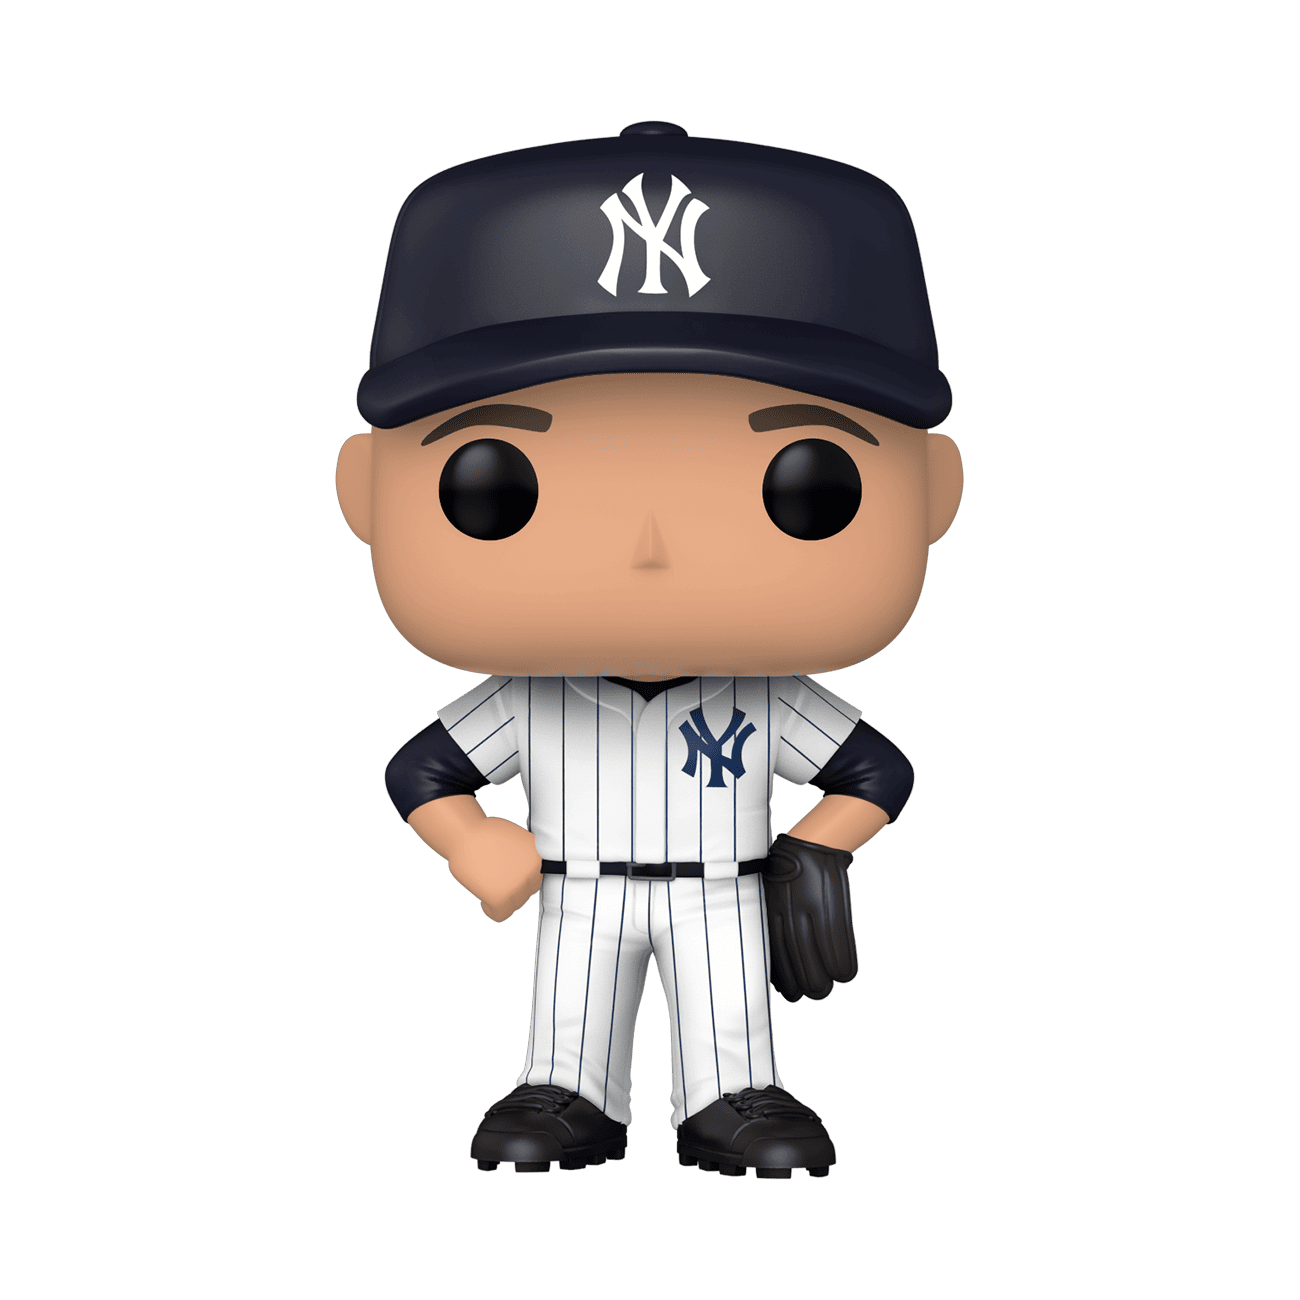 Share This Image - New York Yankees Hat - Free Transparent PNG